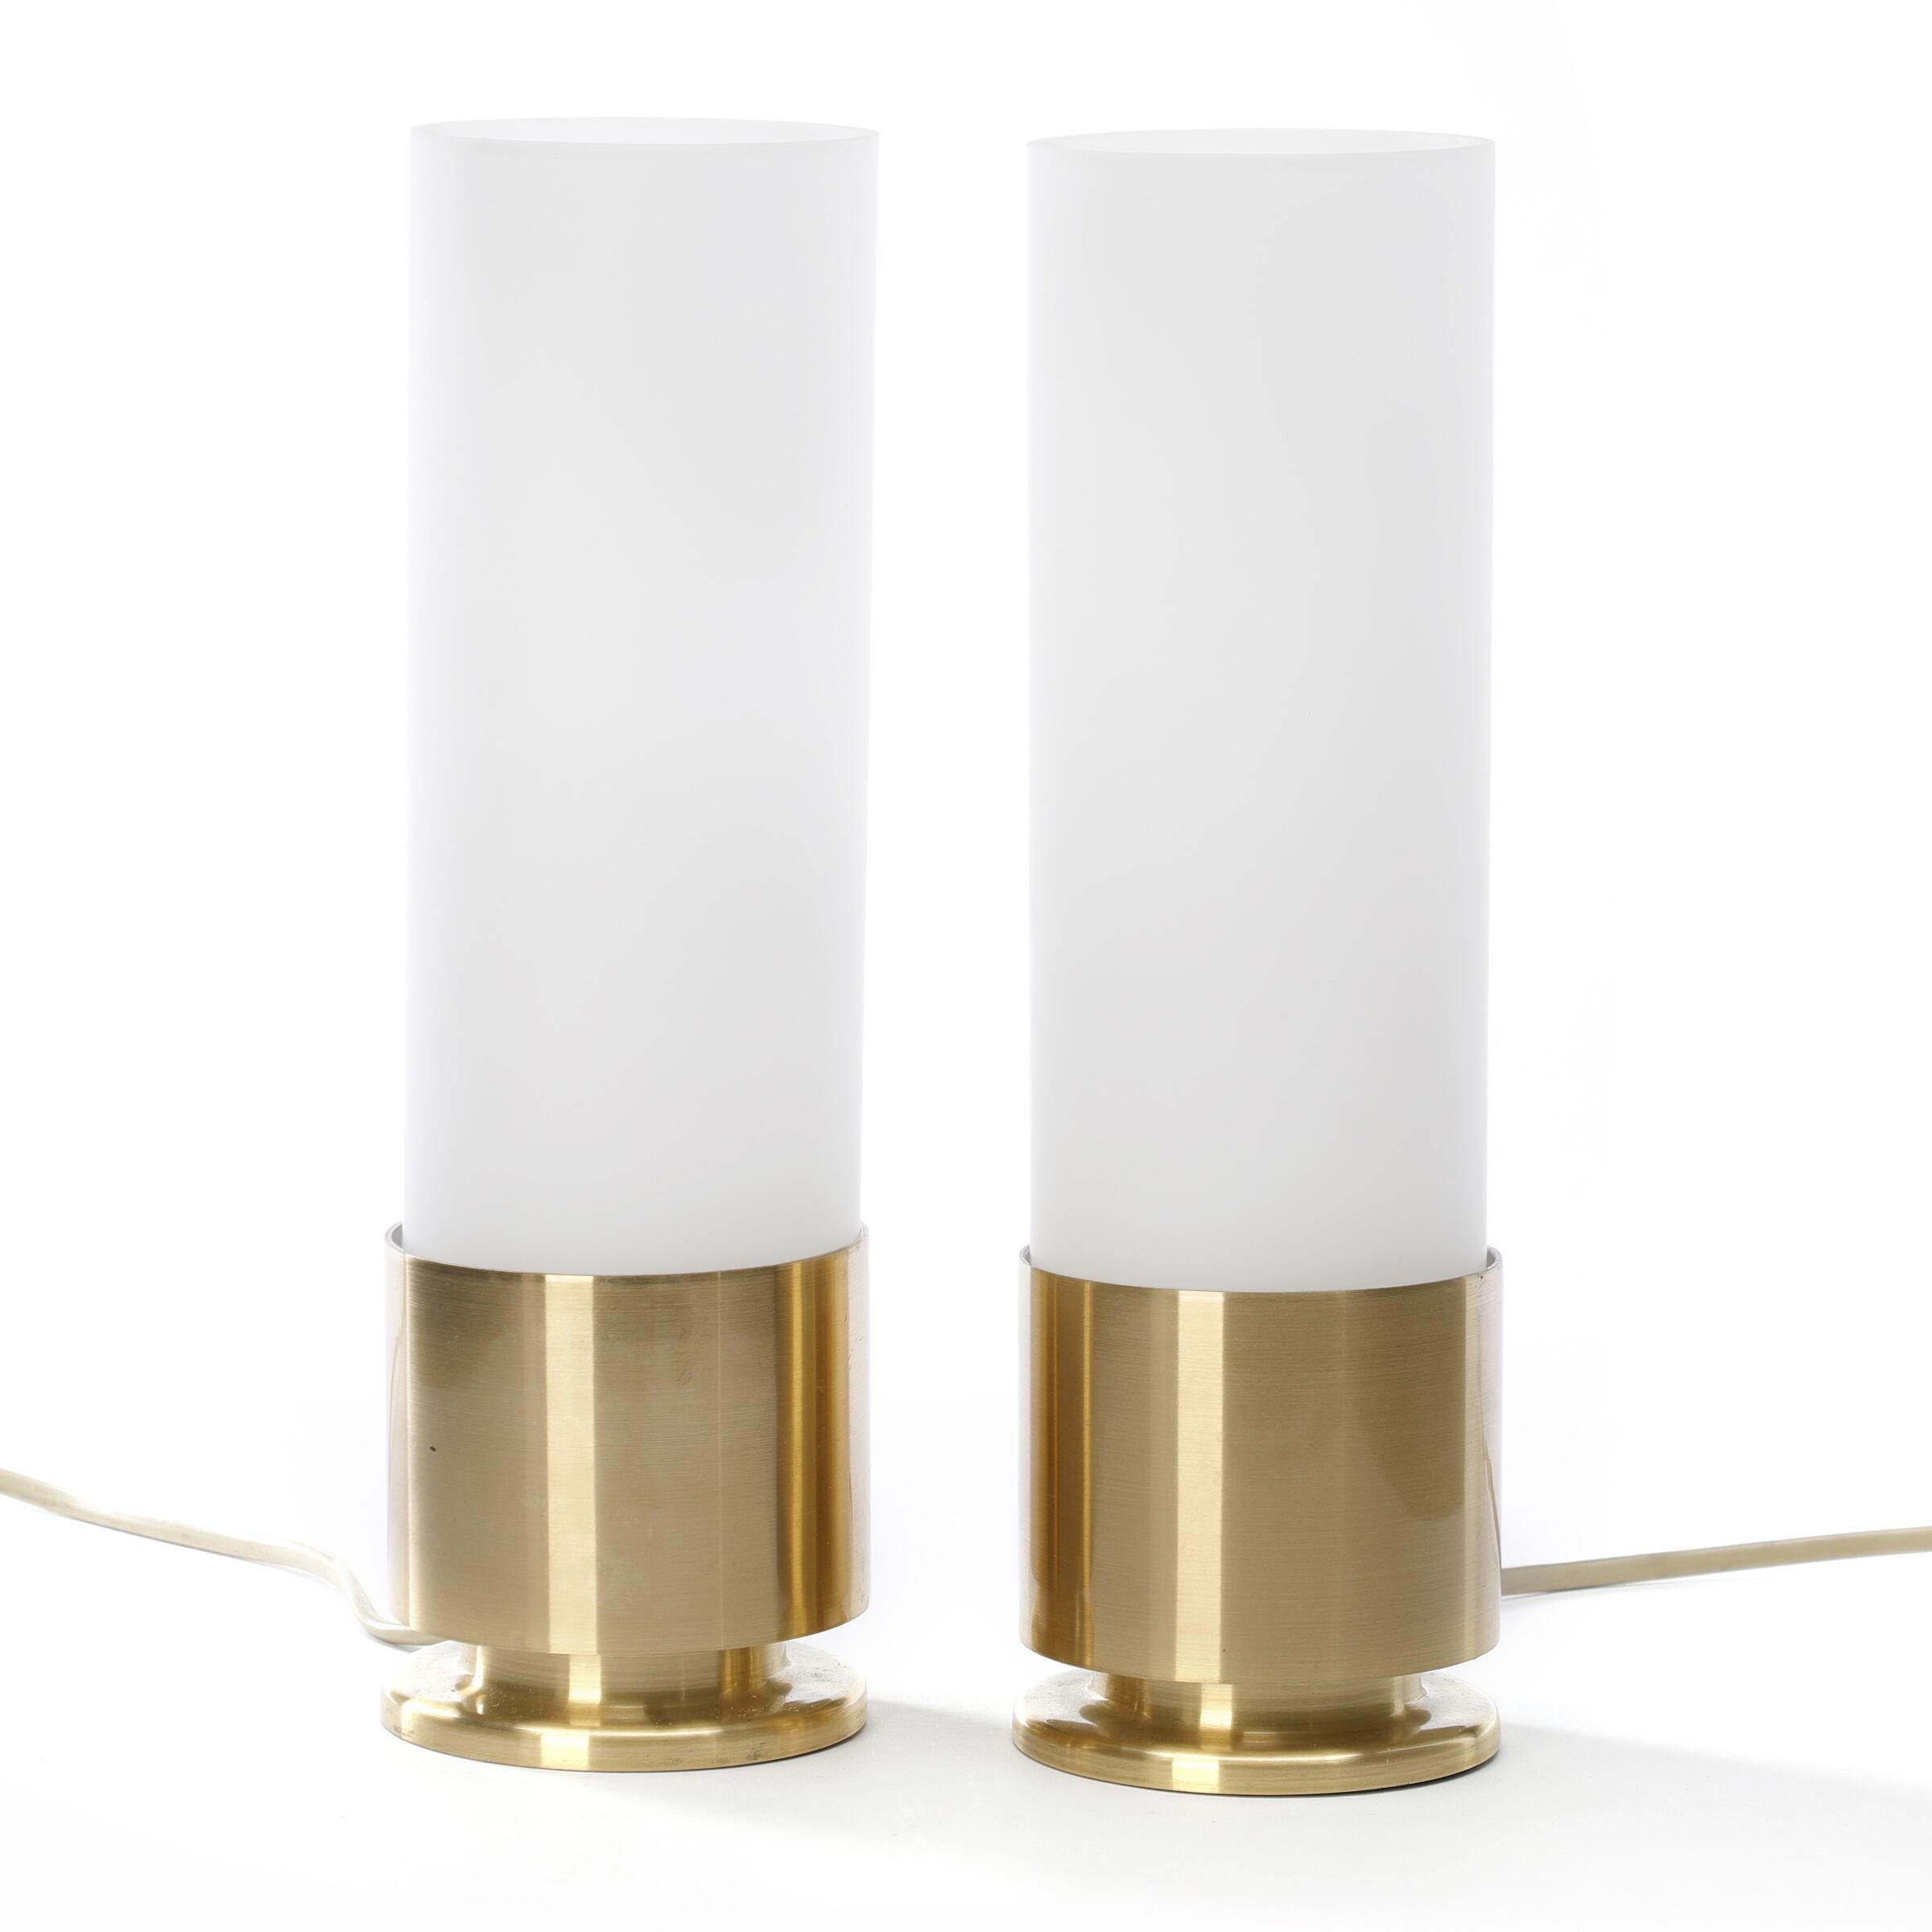 A pair of rare table lamps by Danish designer Jørgen Bo. Made of brass with cylindrical opal glass shades. Designed 1968. Made and branded by Fog & Mørup. H. 27.
This is a table light version of the Jørgen Bo wall light that is more often seen.